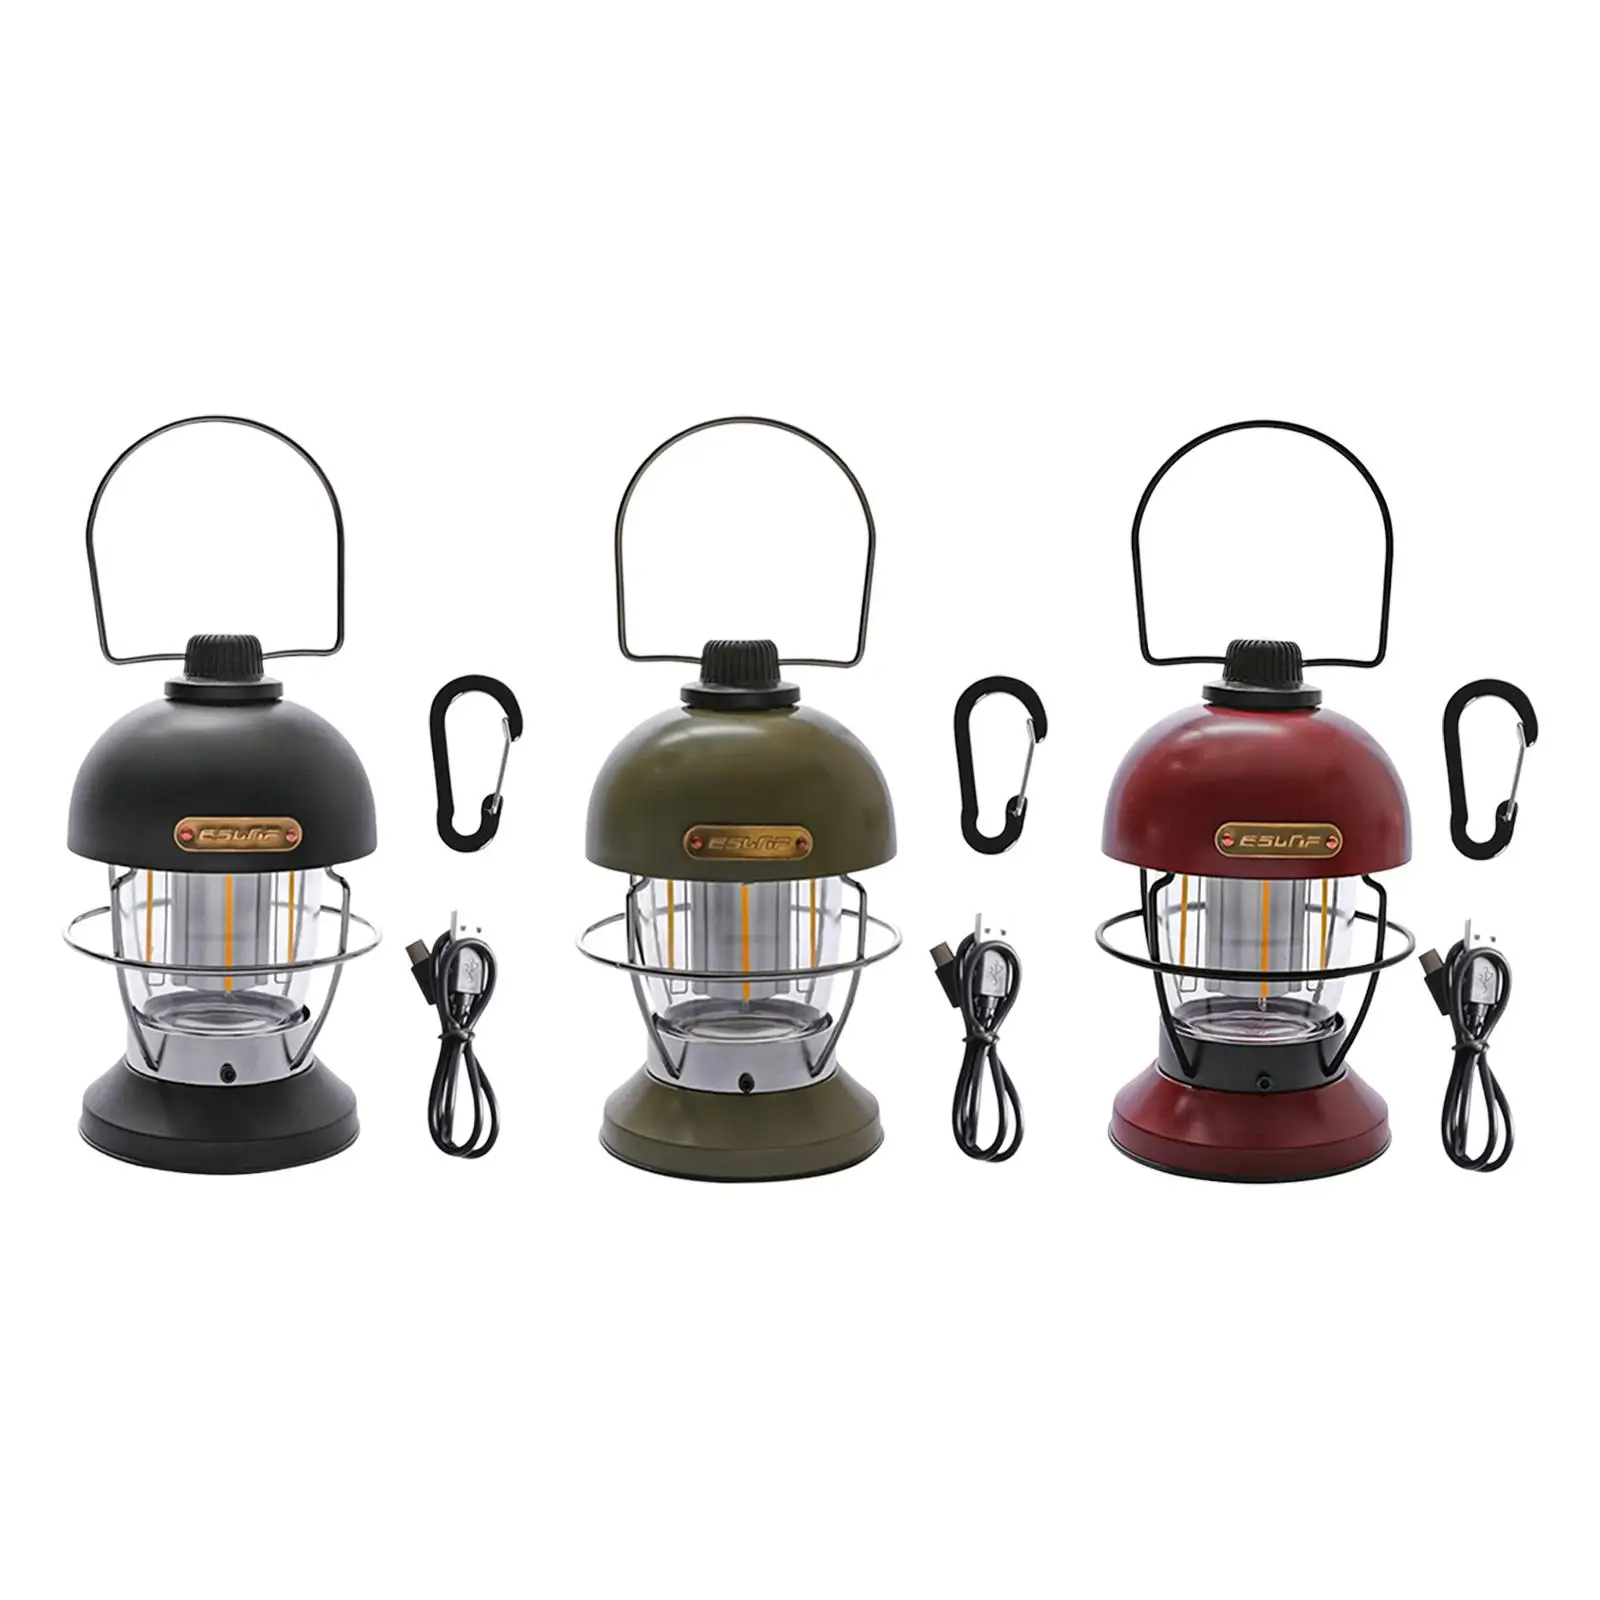 Retro Style Camping Lantern Lamp Waterproof USB Rechargeable Hanging Light for Fishing Camping Emergency Backpacking Picnic